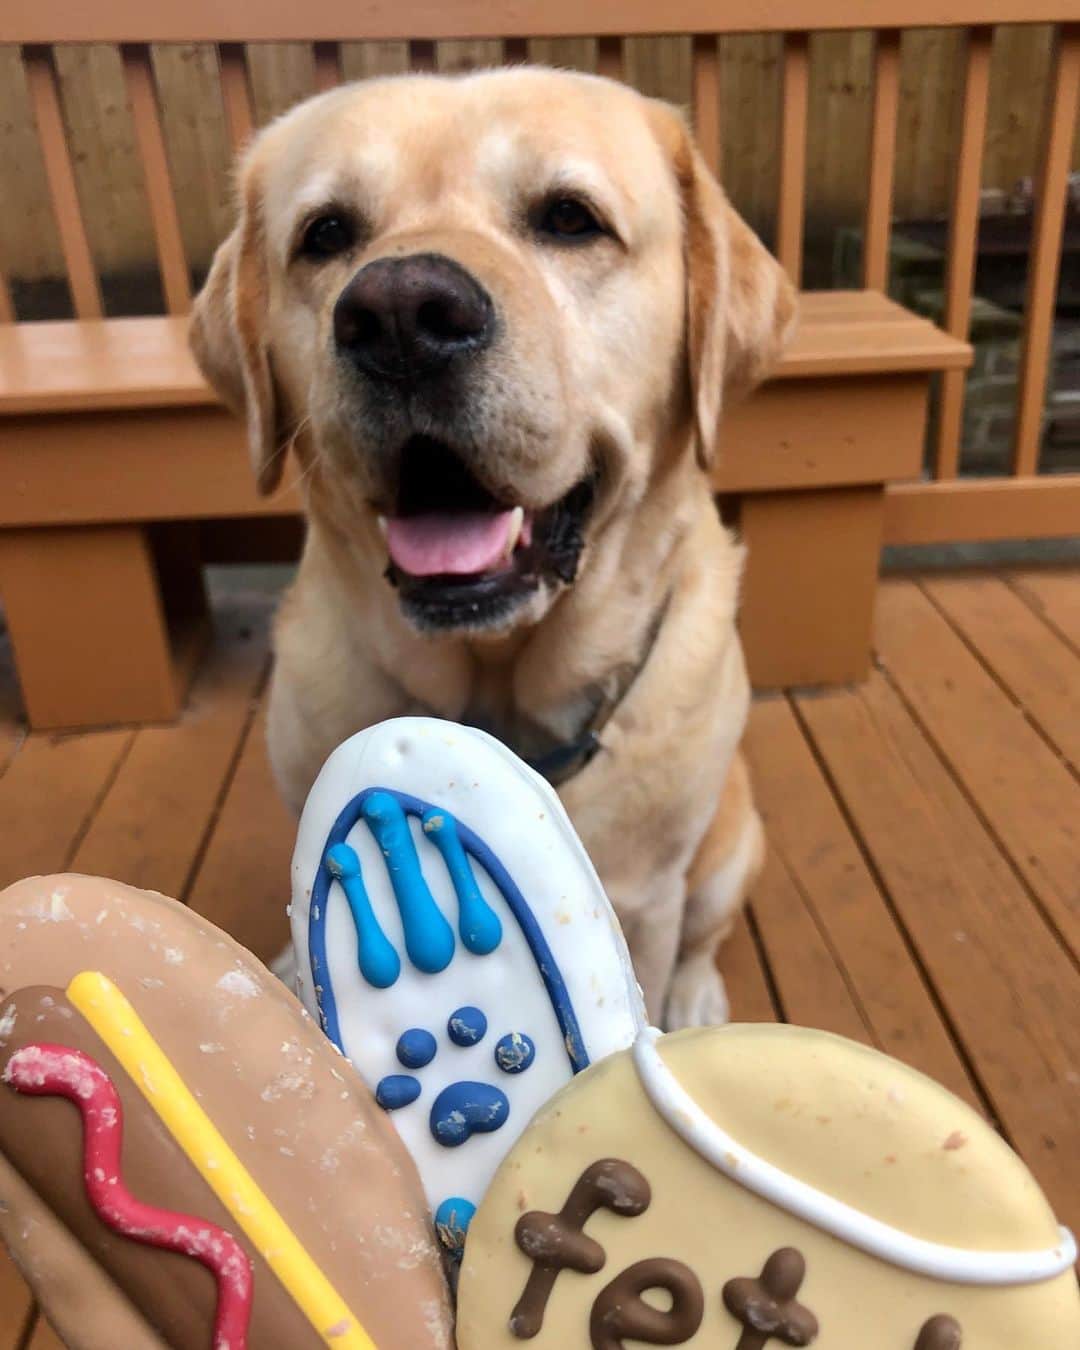 Huckのインスタグラム：「Mom bought me some special treats since today is MY 5TH BIRTHDAY! Its time to pawwty! 💙🎈🎉🐾 . . . . . . . . . #happybirthday #talesofalab #yellowlab #labsofinstagram #worldofmylab #fab_labs_ #labradorretriever #labrador_class #thelablove_feature #englishlabrador #yellowlabsofinstagram #labphotooftheday #instalab #yellowlabsquad #labstagram #itsaparty」